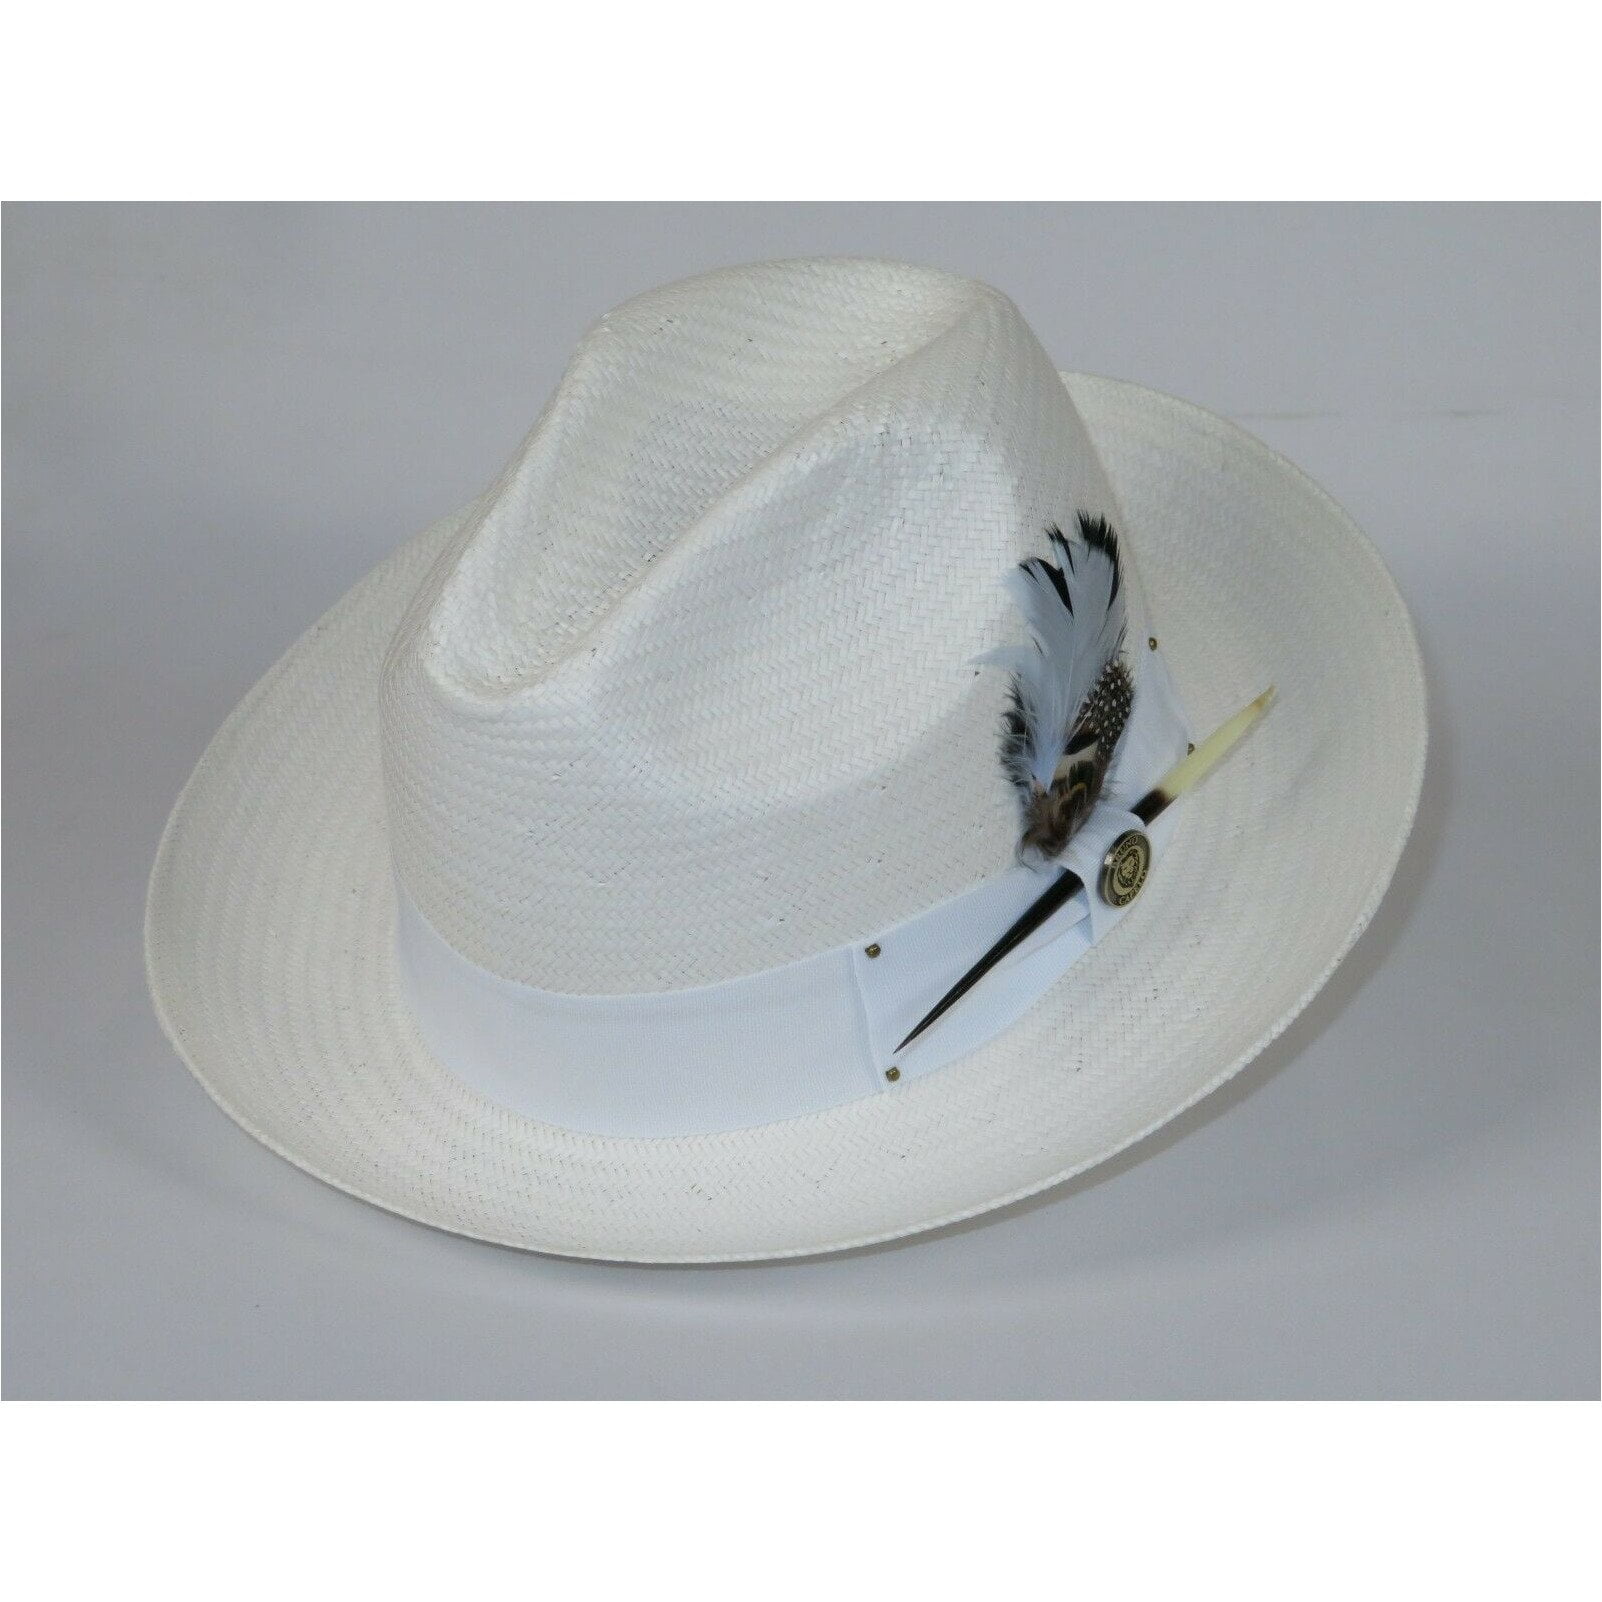 Men's Fedora Dress Casual Hat Summer Straw Solid White 100% Natural Straw ST-950 